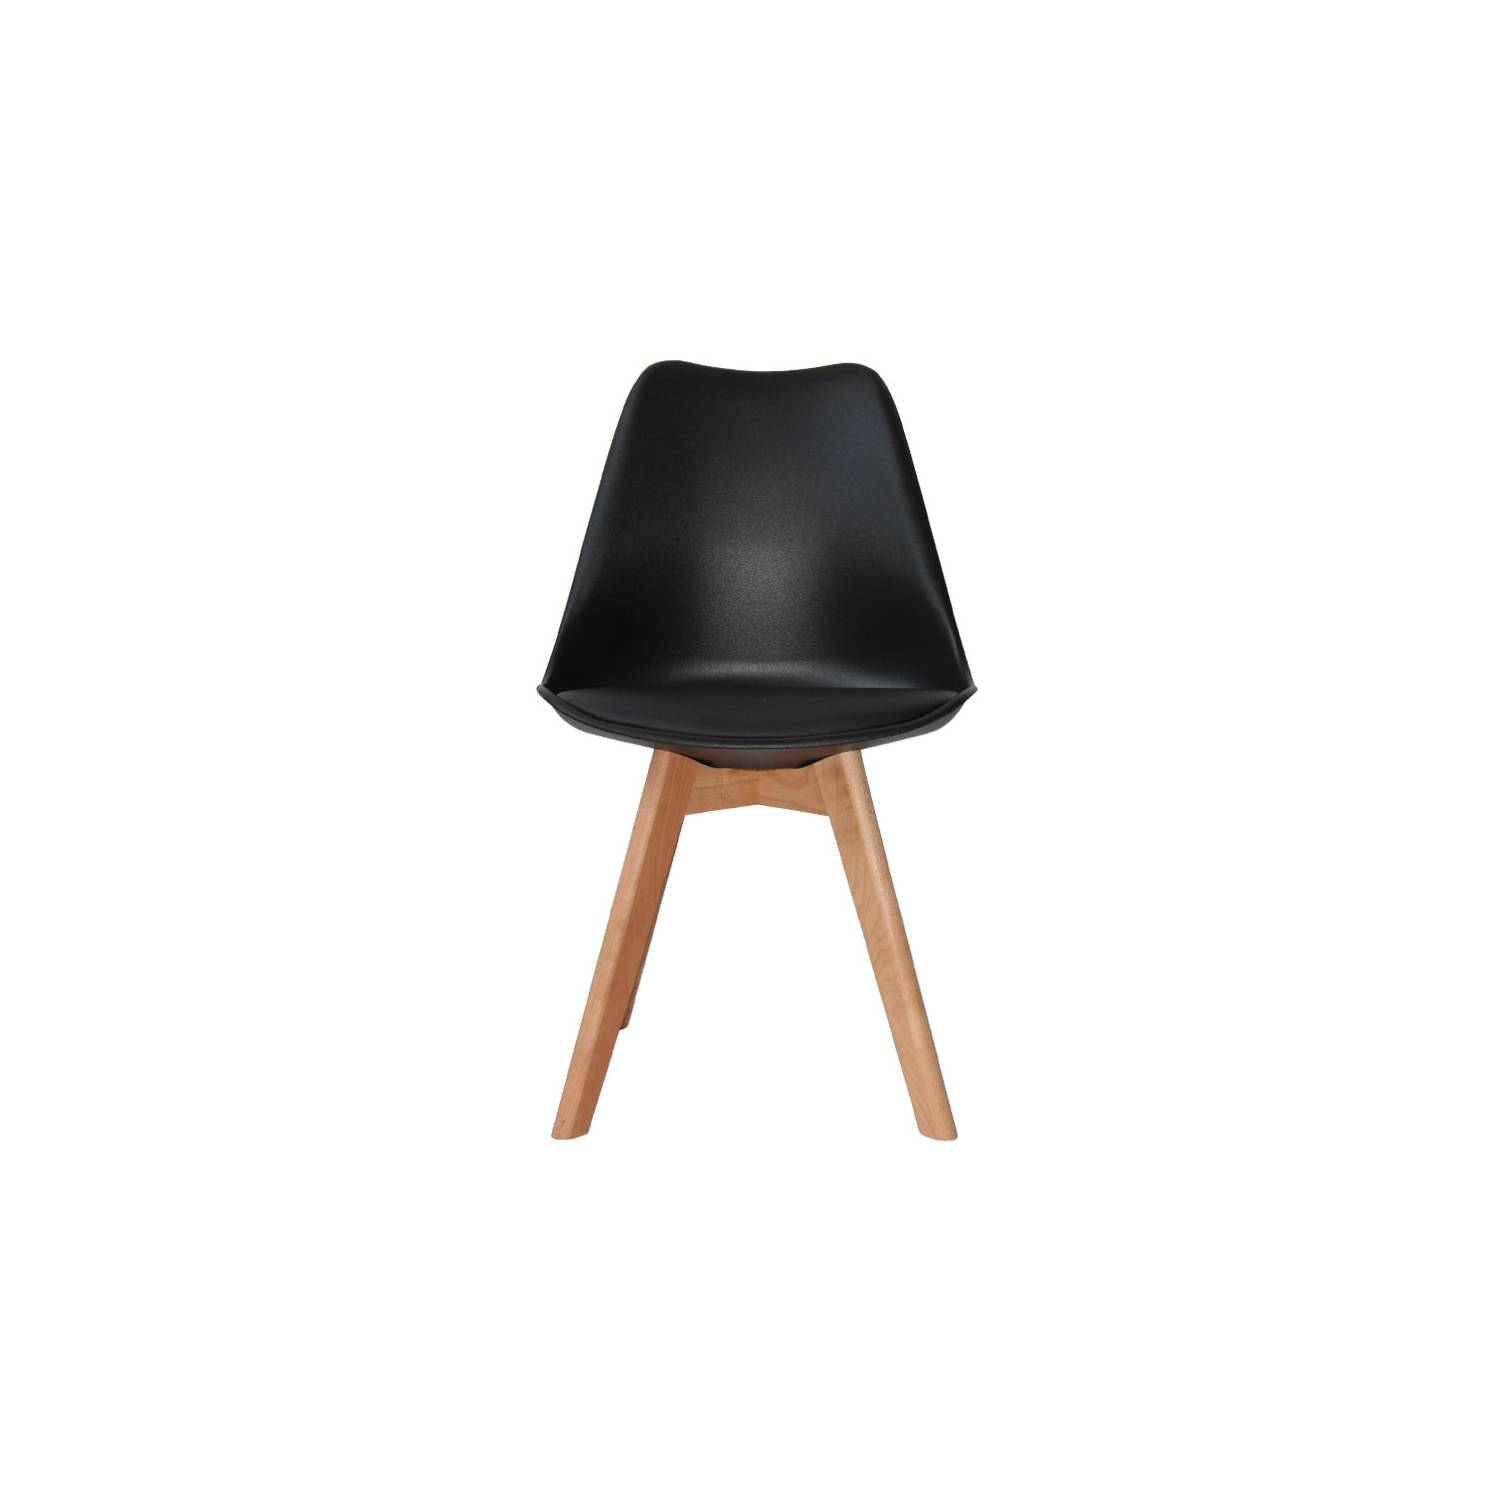 PACK 4 CHAISES NEW TOWER WOOD NOIRES